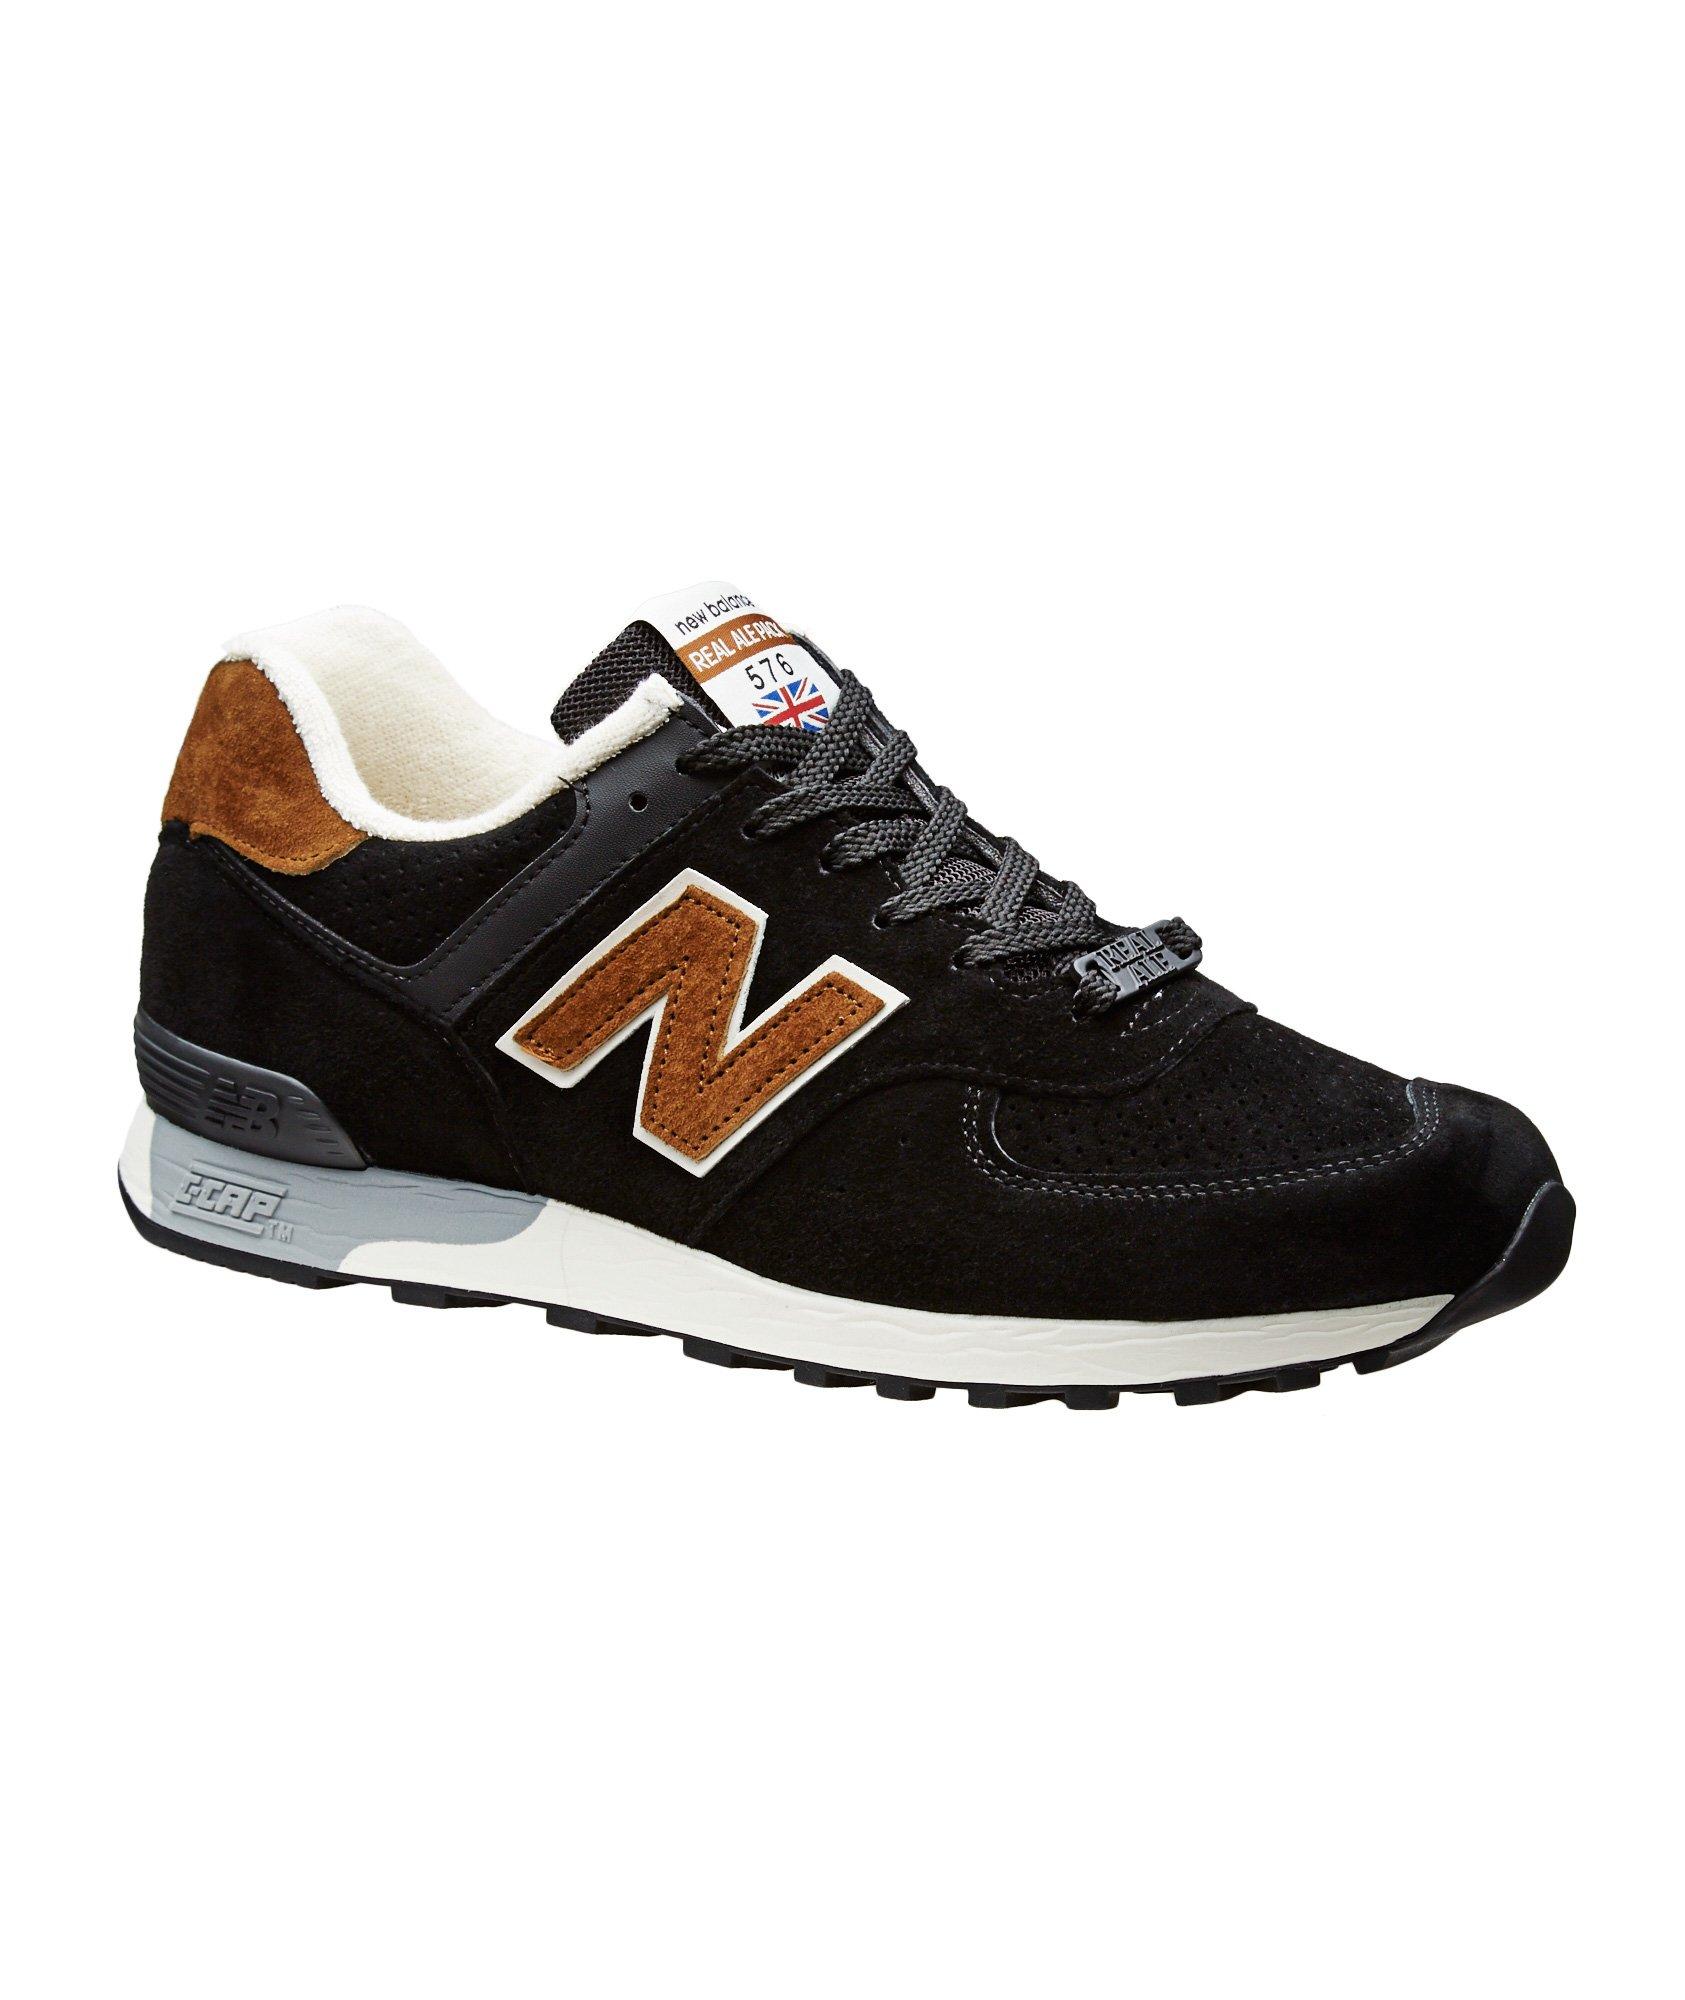  'Real Ale Pack' 576 Sneakers image 0